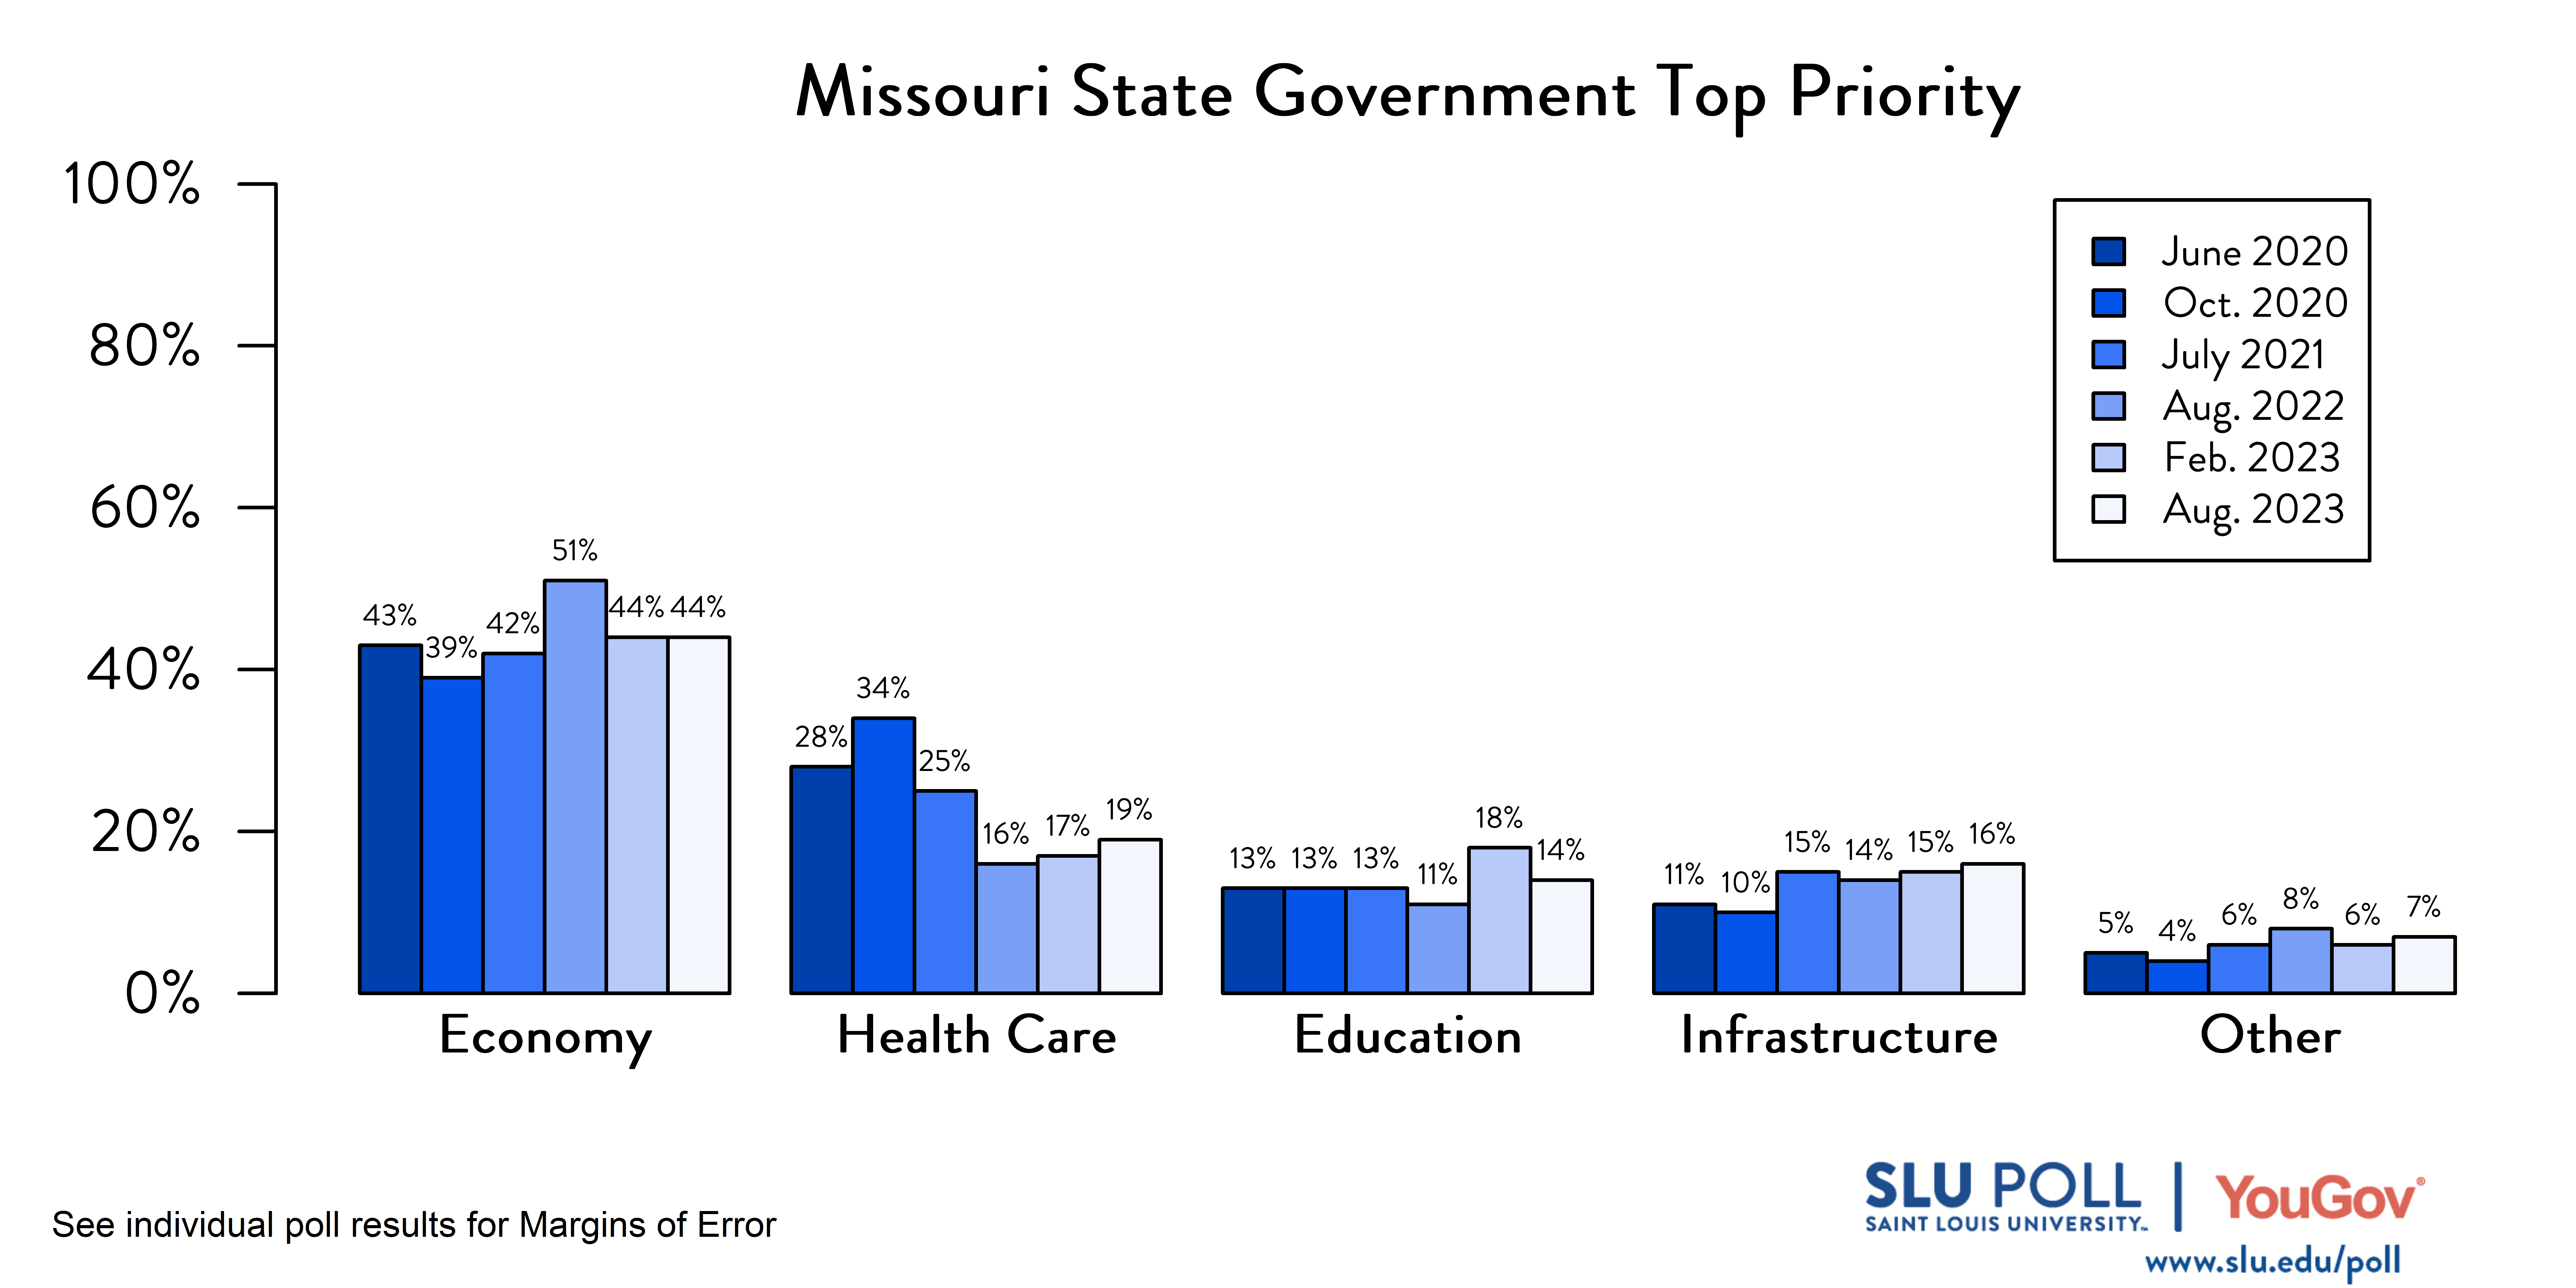 Likely voters' responses to 'Which of the following do you think should be the TOP priority of the Missouri state government?'. June 2020 Voter Responses 43% Economy, 28% Health Care, 13% Education, 11% Infrastructure, and 5% Other. October 2020 Voter Responses: 39% Economy, 34% Health care, 13% Education, 10% Infrastructure, and 4% Other. July 2021 Voter Responses: 42% Economy, 25% Health care, 13% Education, 15% Infrastructure, and 6% Other. August 2022 Voter Responses: 51% Economy, 16% Health care, 11% Education, 14% Infrastructure, and 8% Other. February 2023 Voter Responses: 44% Economy, 17% Health care, 18% Education, 15% Infrastructure, and 6% Other. August 2023 Voter Responses: 44% Economy, 19% Health care, 14% Education, 16% Infrastructure, and 7% Other.